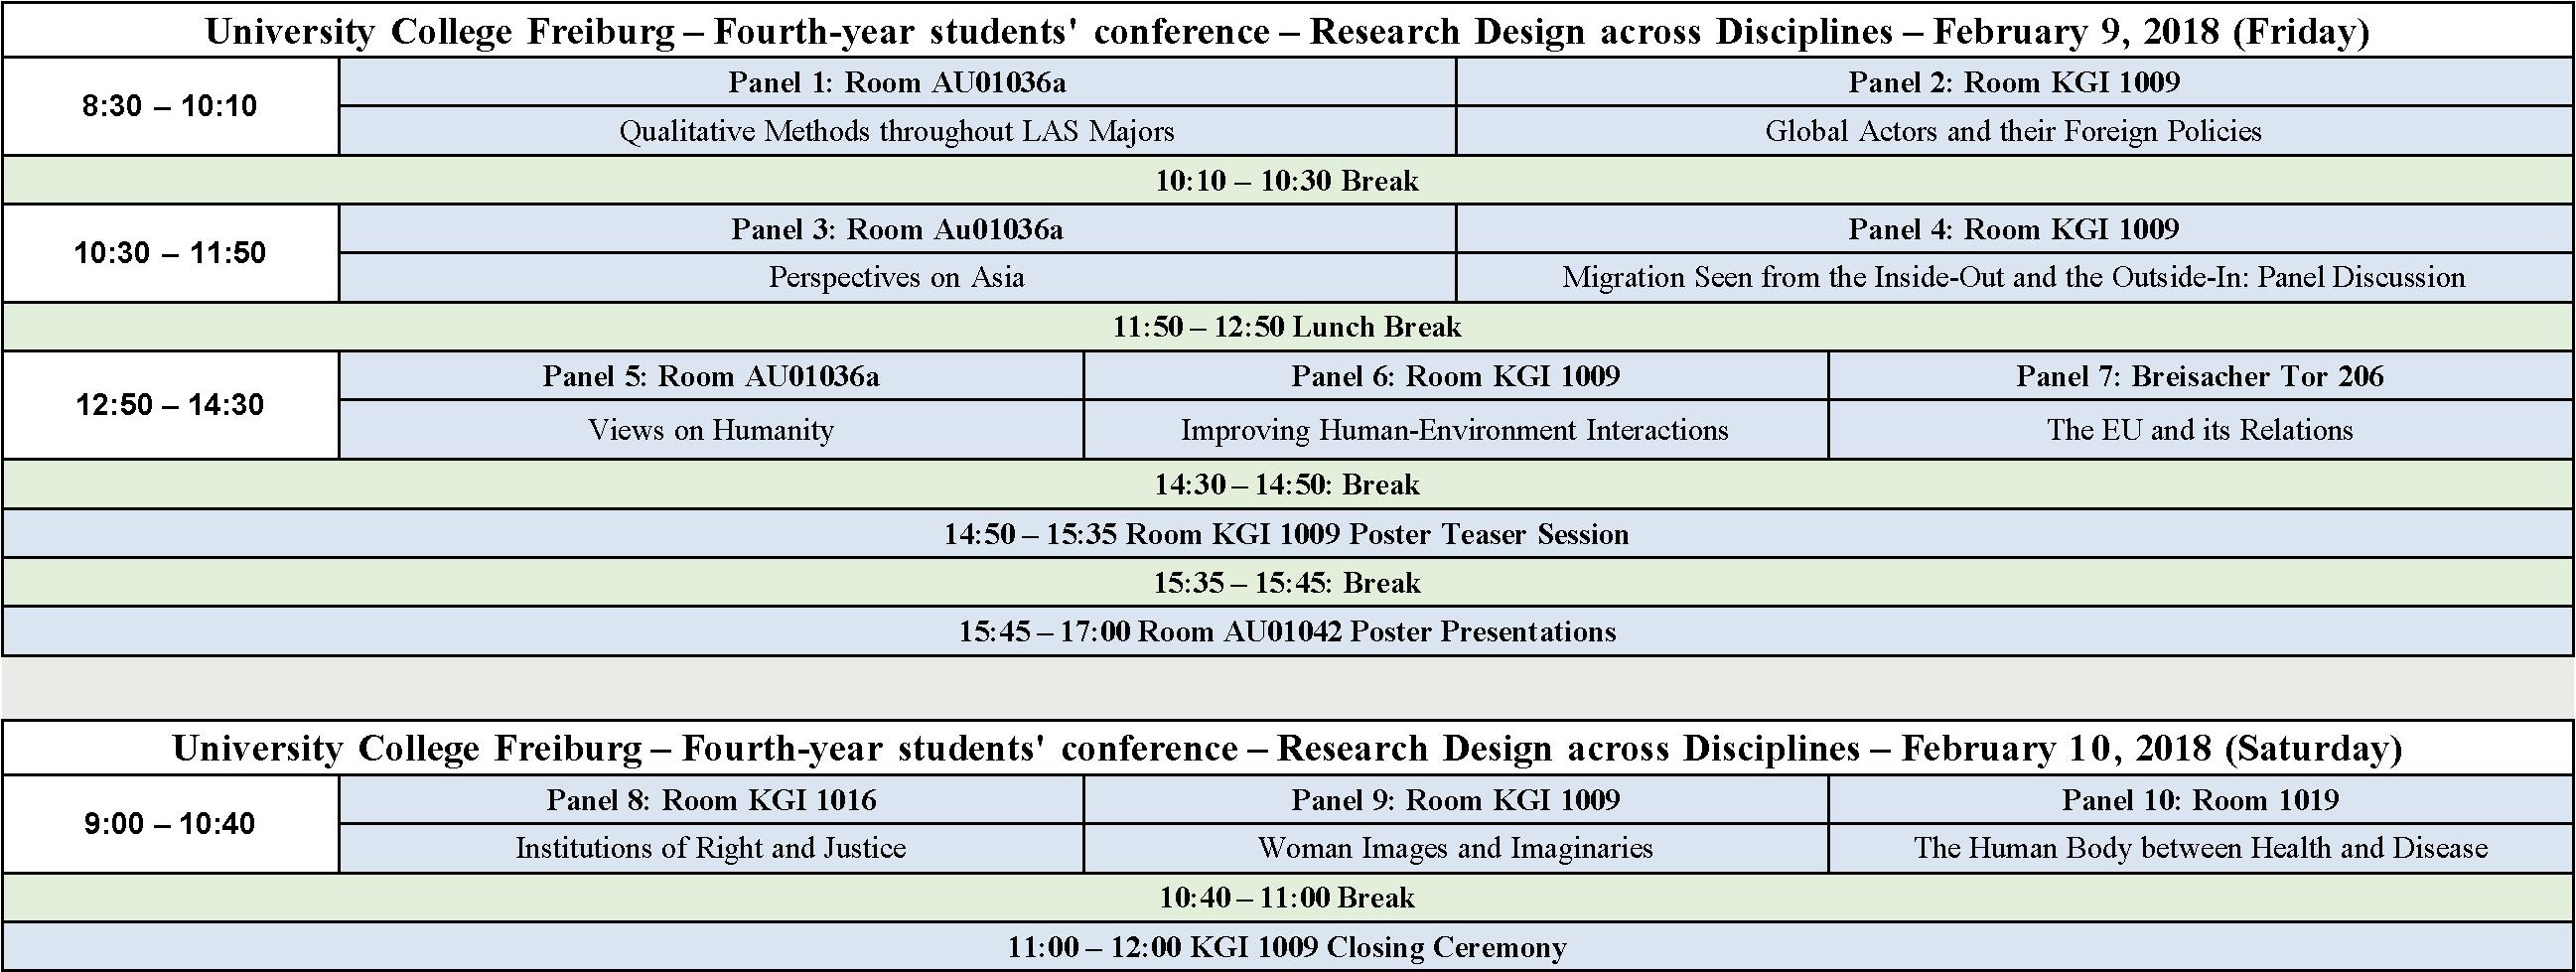 UCF Research Design Conference 2018